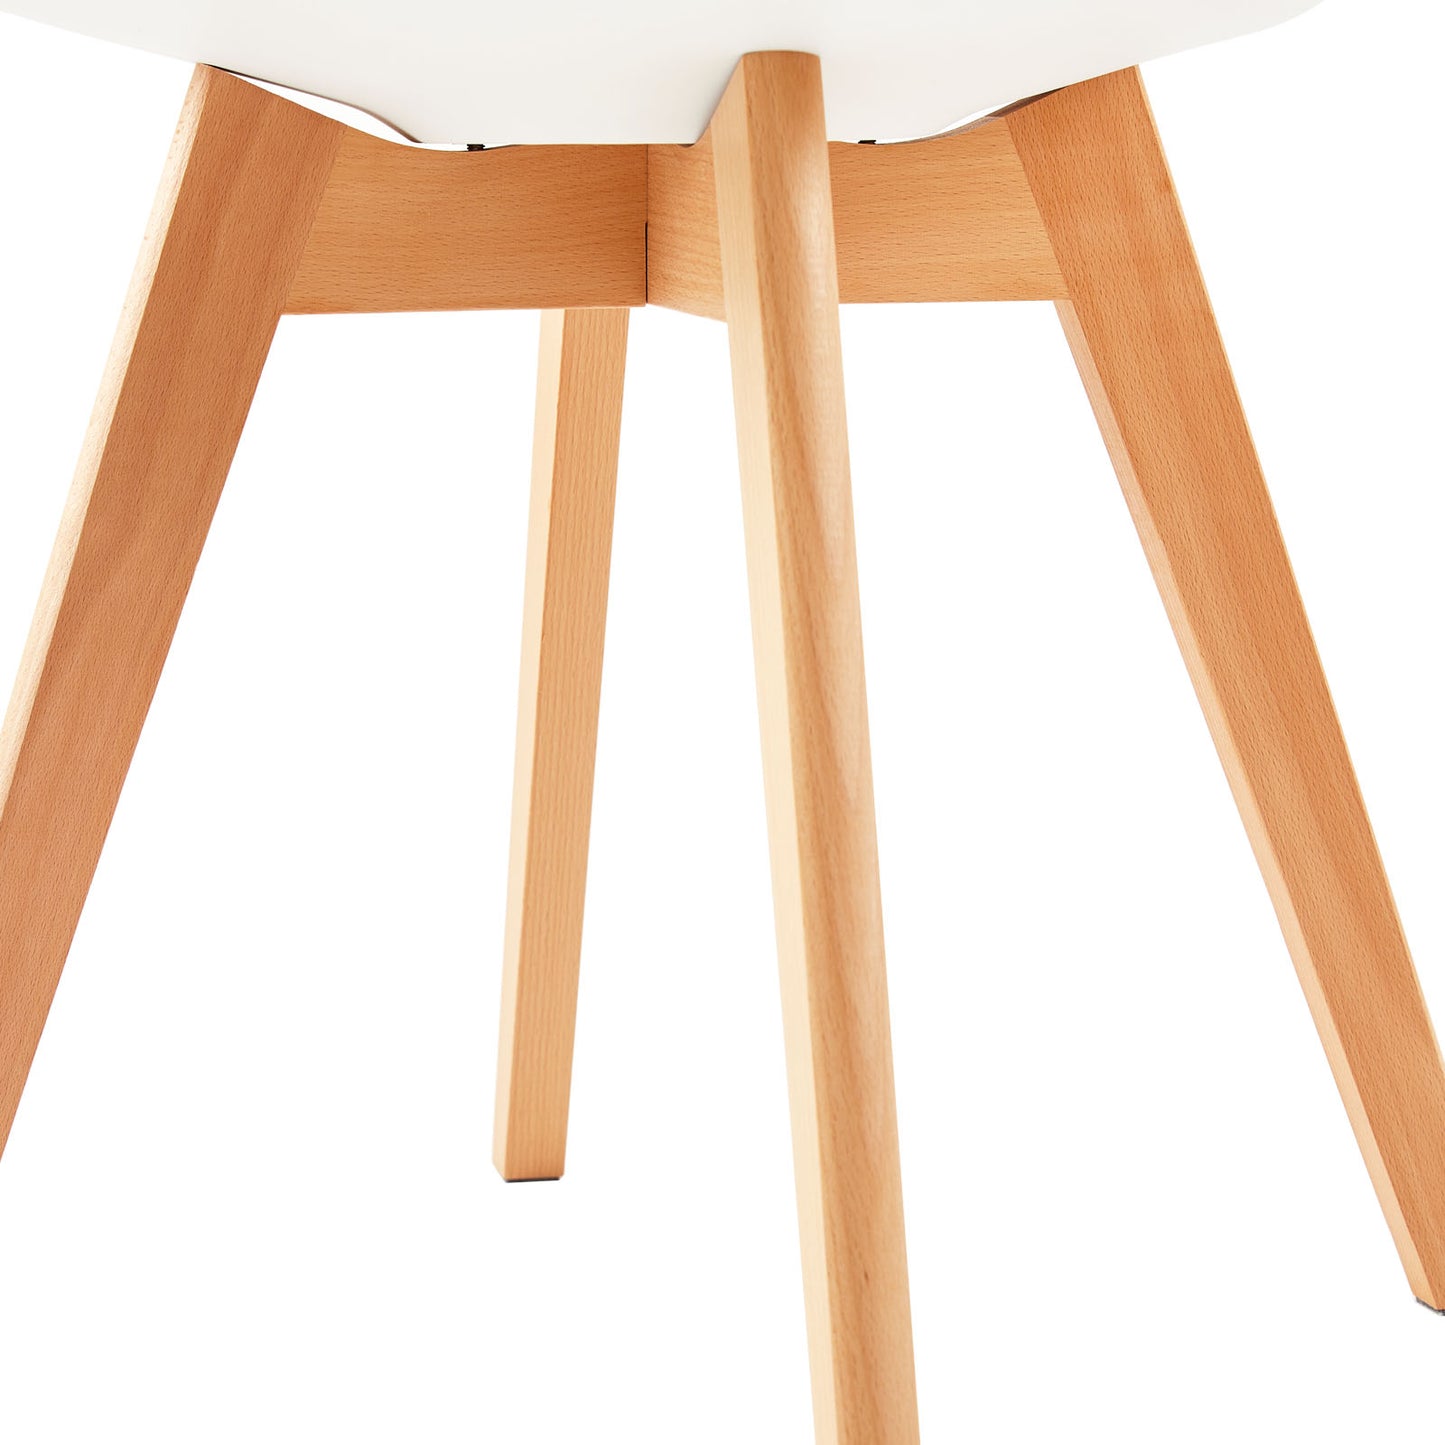 TULIP Dining Chair with Beech Legs - White/Camel